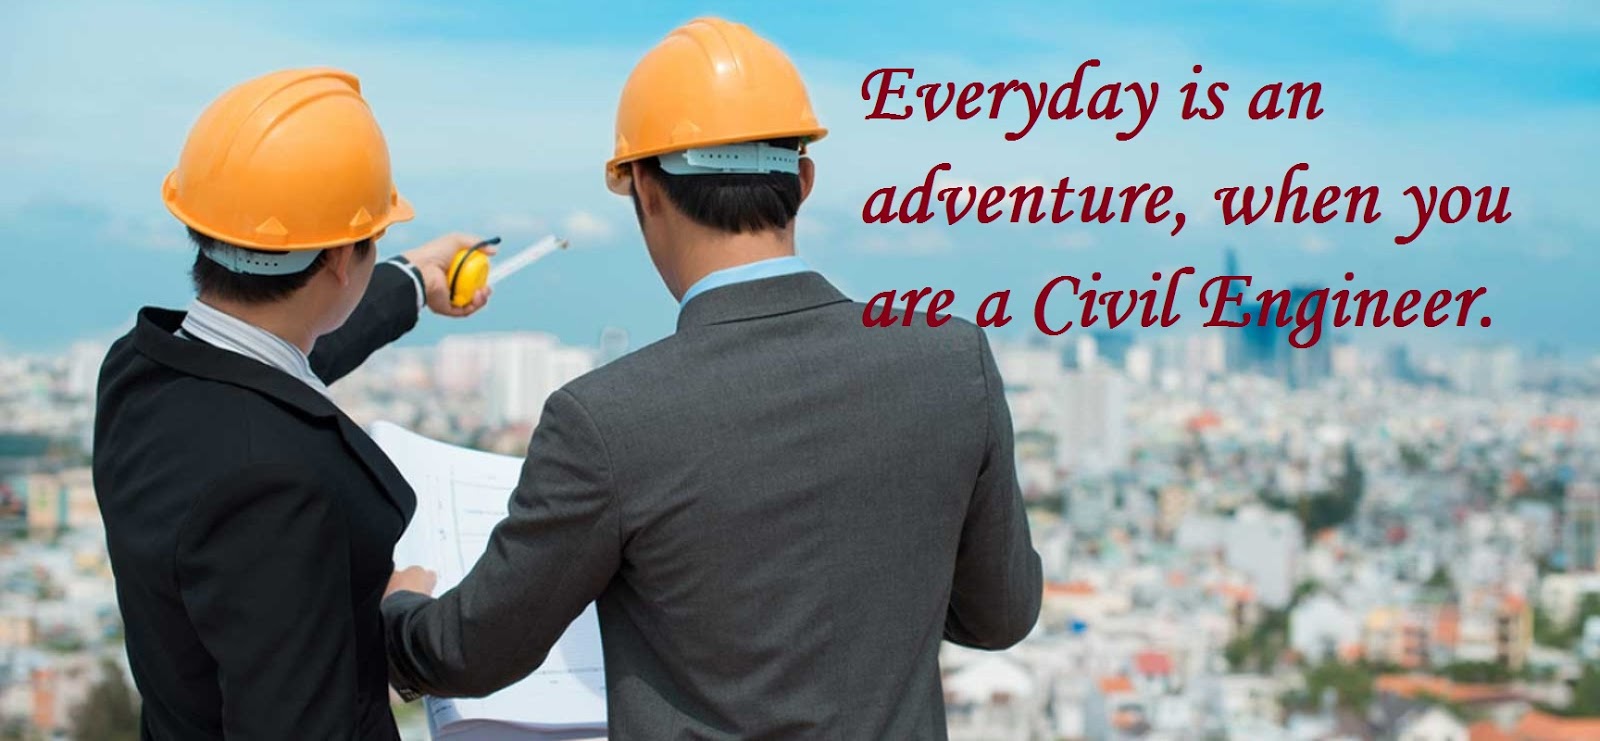 civil engineering quotes wallpapers,hard hat,personal protective equipment,product,engineer,hat